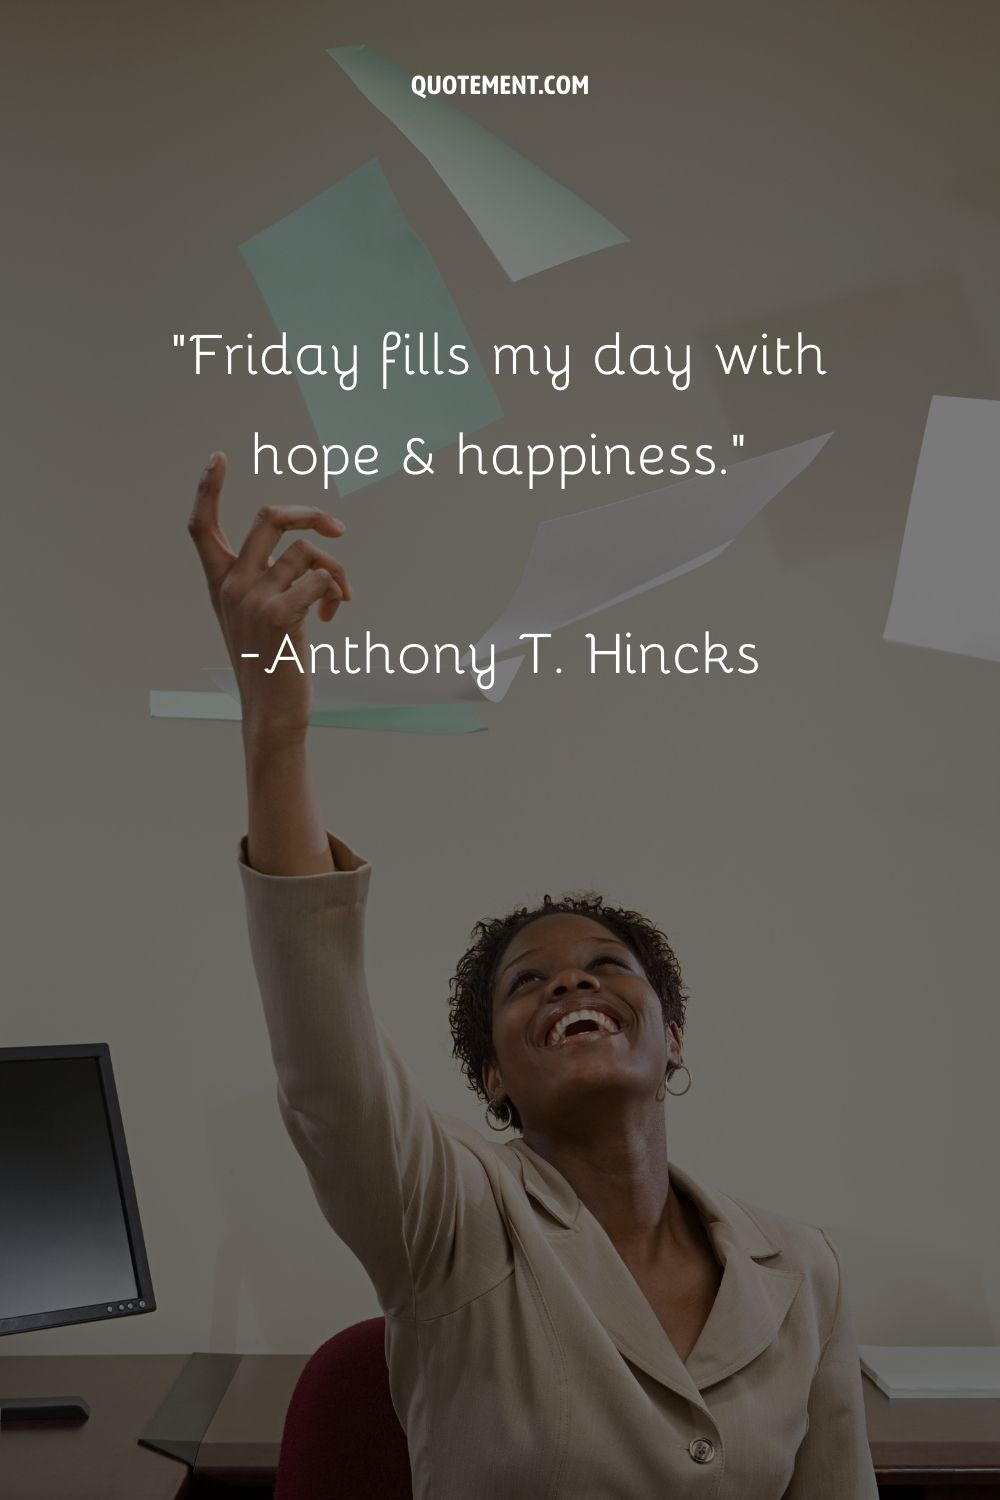 "Friday fills my day with hope & happiness." – Anthony T. Hincks